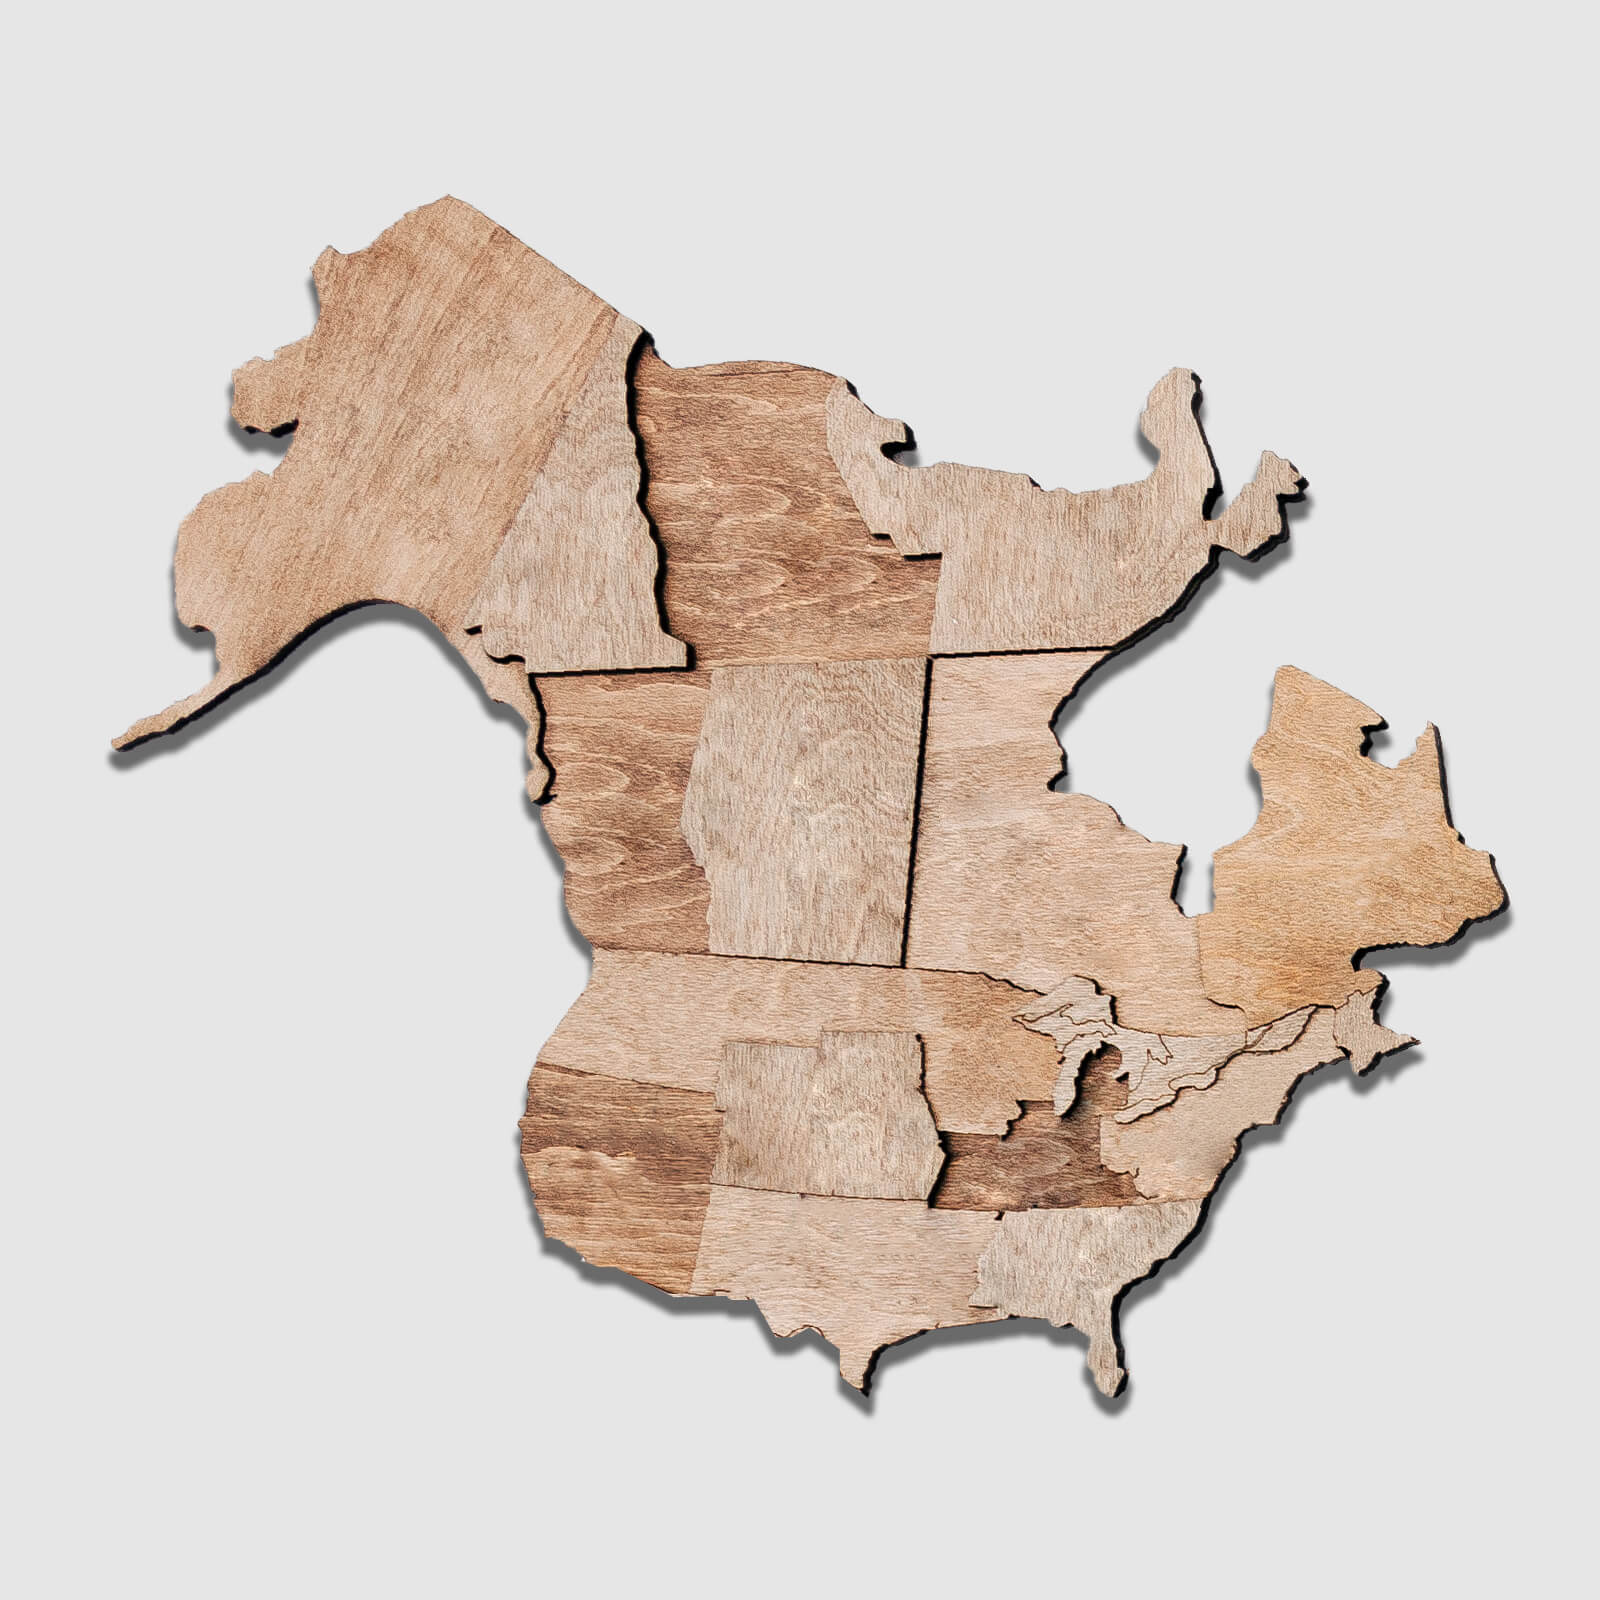 3D Wooden World Map Sirius from Enjoy The Wood ‣ Good Price, Reviews